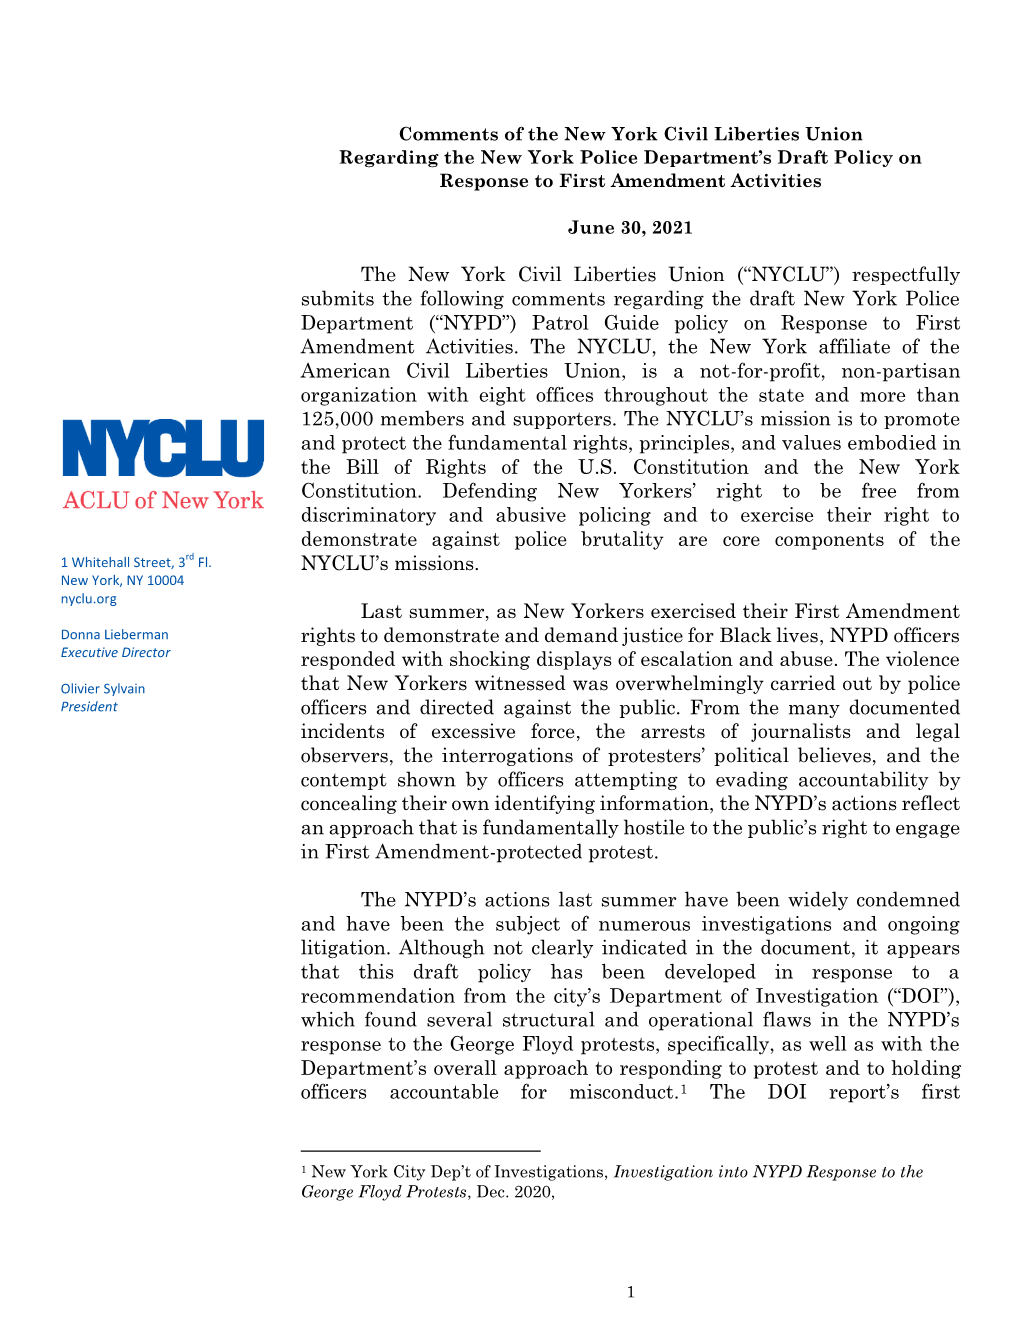 Pdfcomments on the NYPD's First Amendment Policy